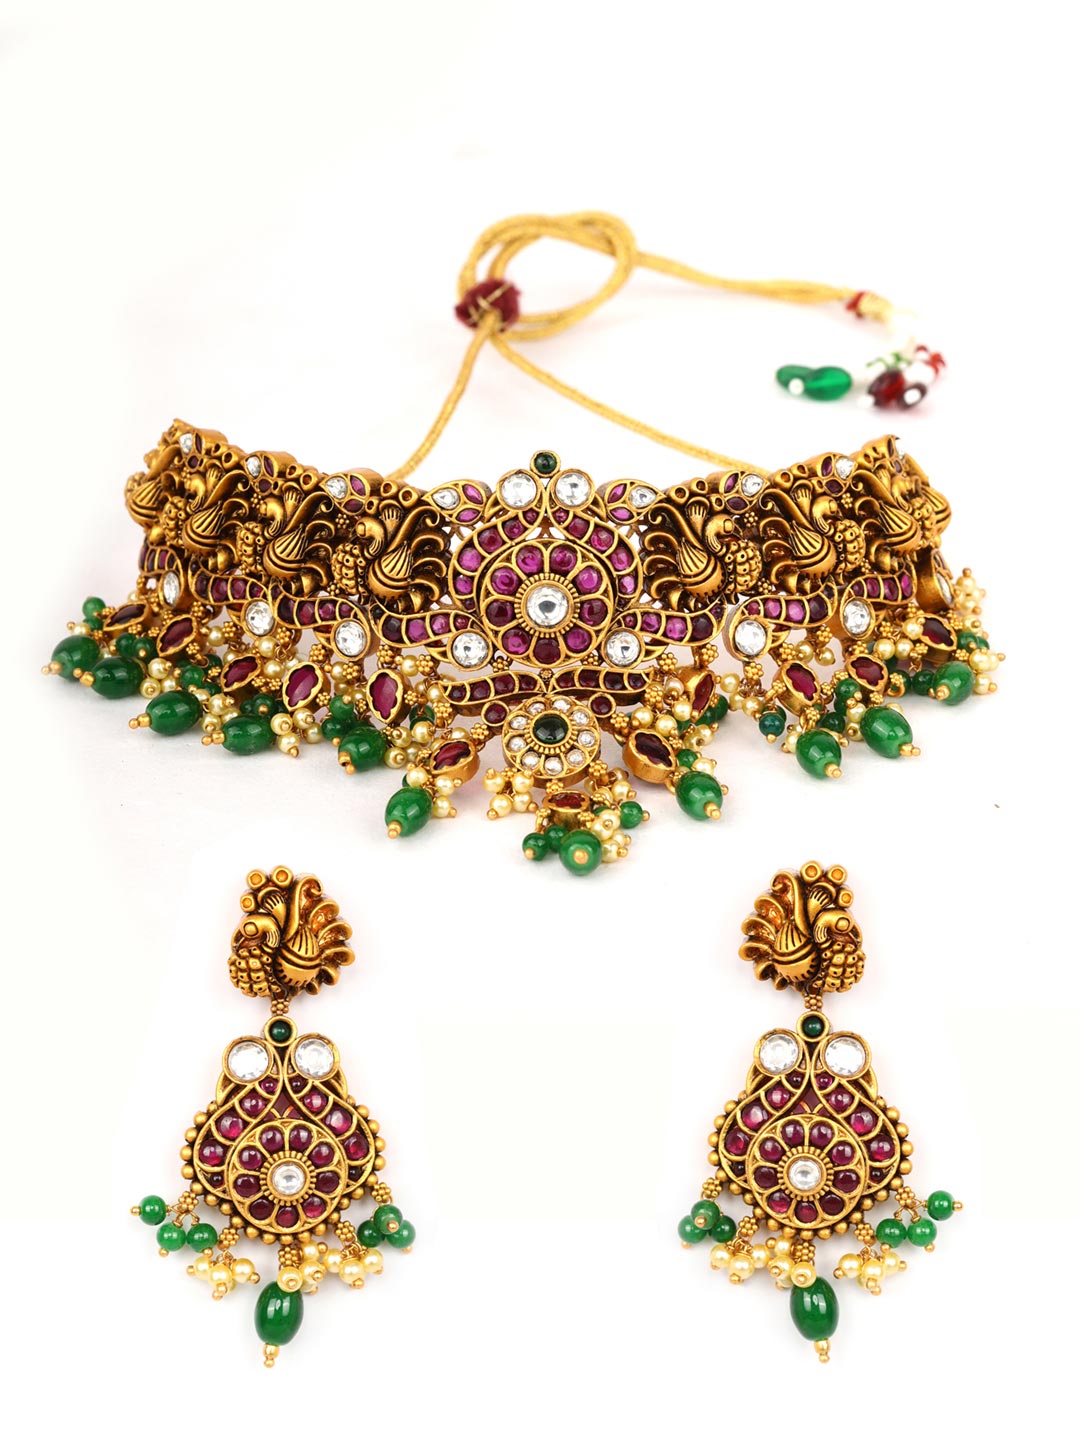 Green Pearls Beads Ruby Stones Gold Plated Peacock Choker